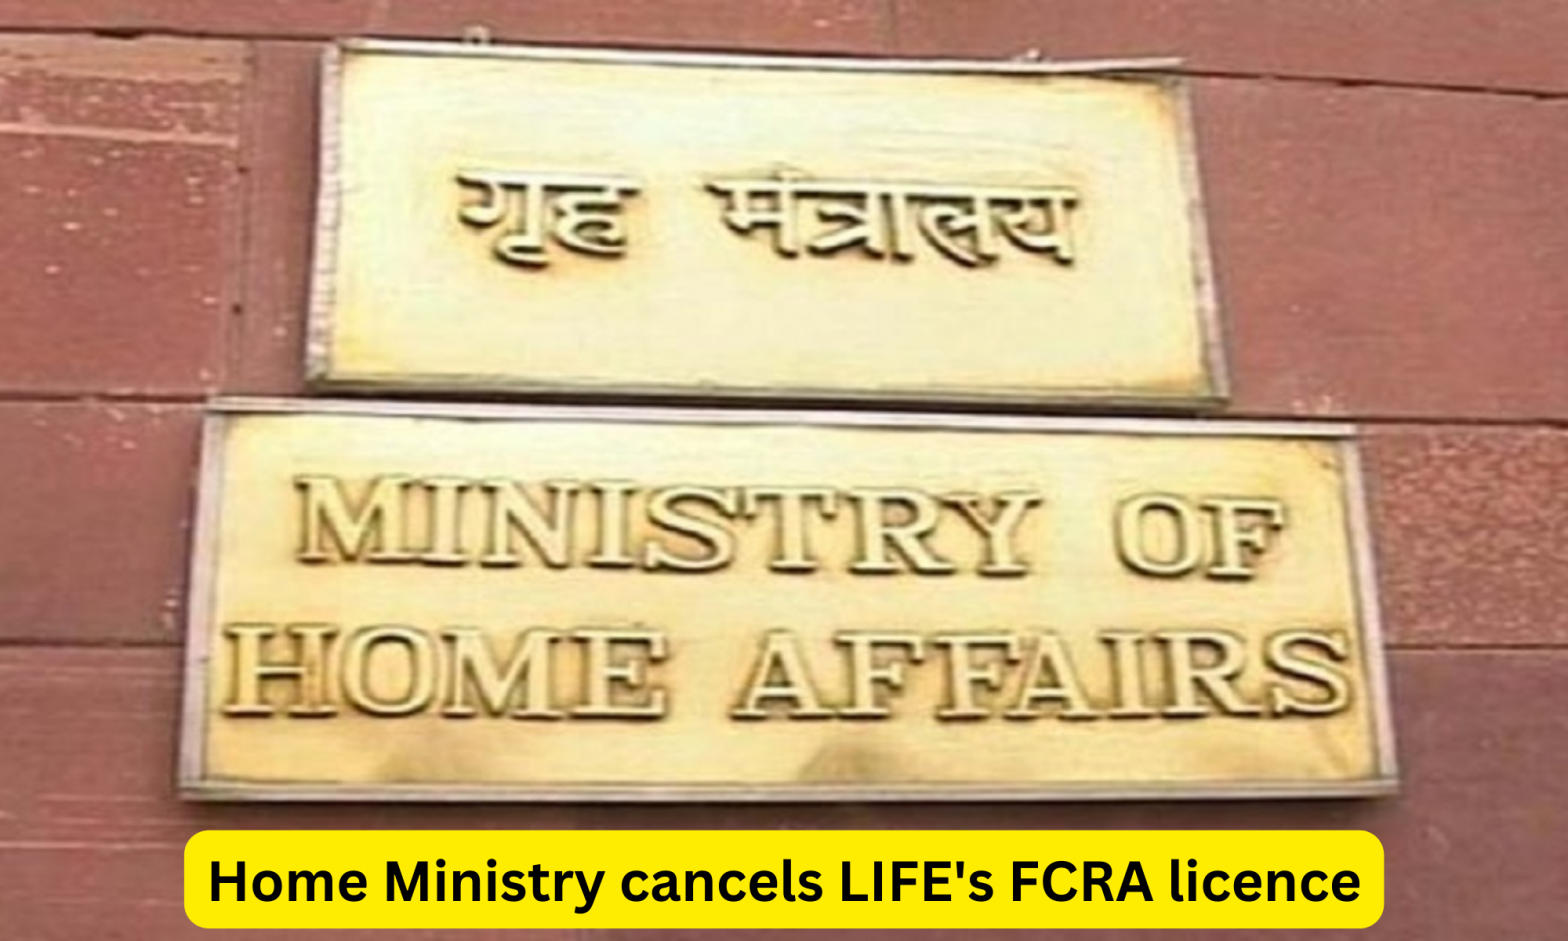 Home Ministry cancels LIFE's FCRA licence